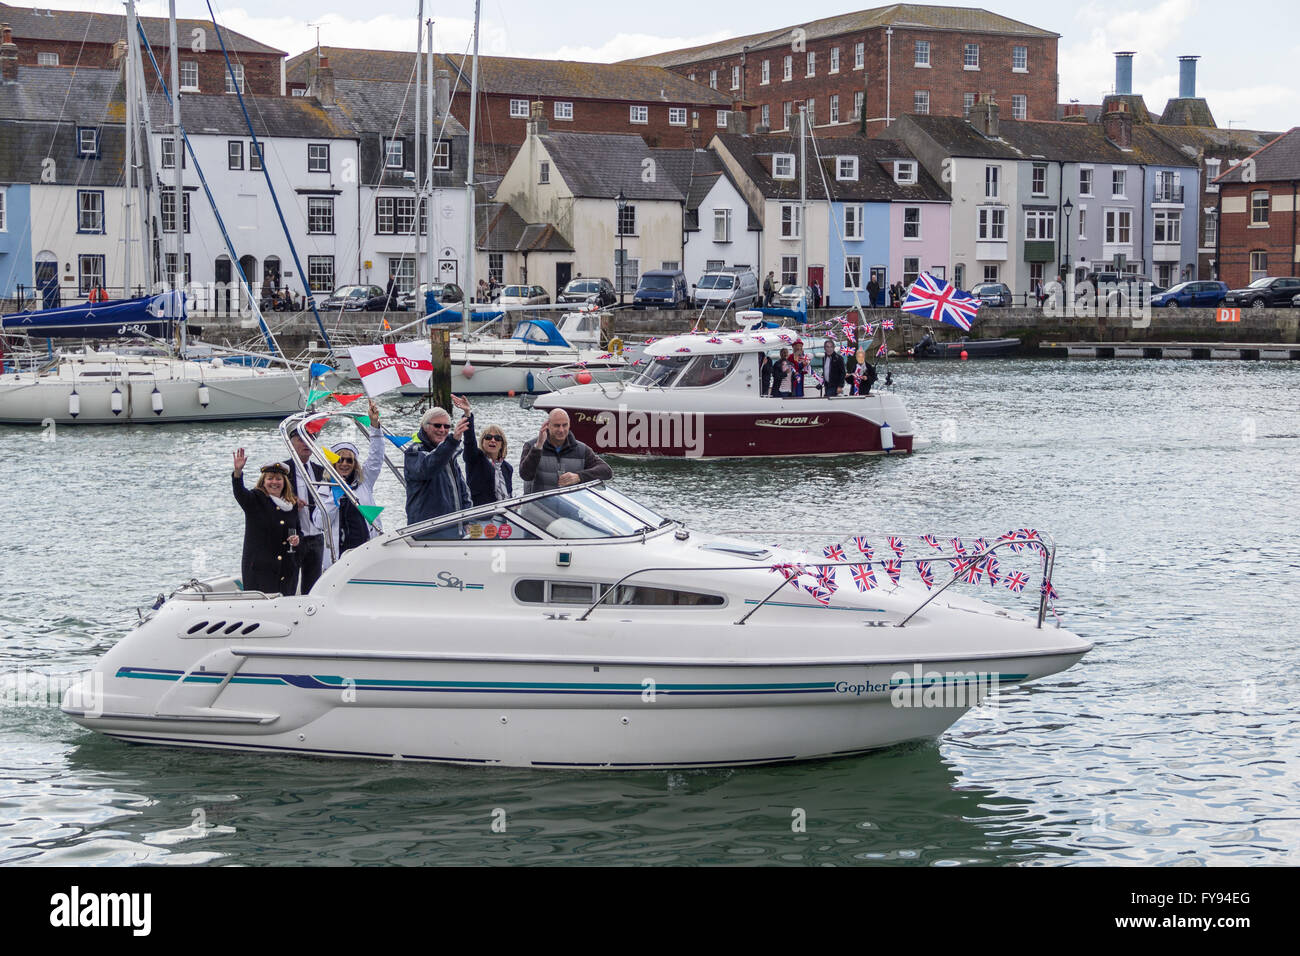 Weymouth, England. 23 April 2016. Queen's 90th Birthday Floating Tribute. Gopher, people waving. Credit:  Frances Underwood/Alamy Live News Stock Photo